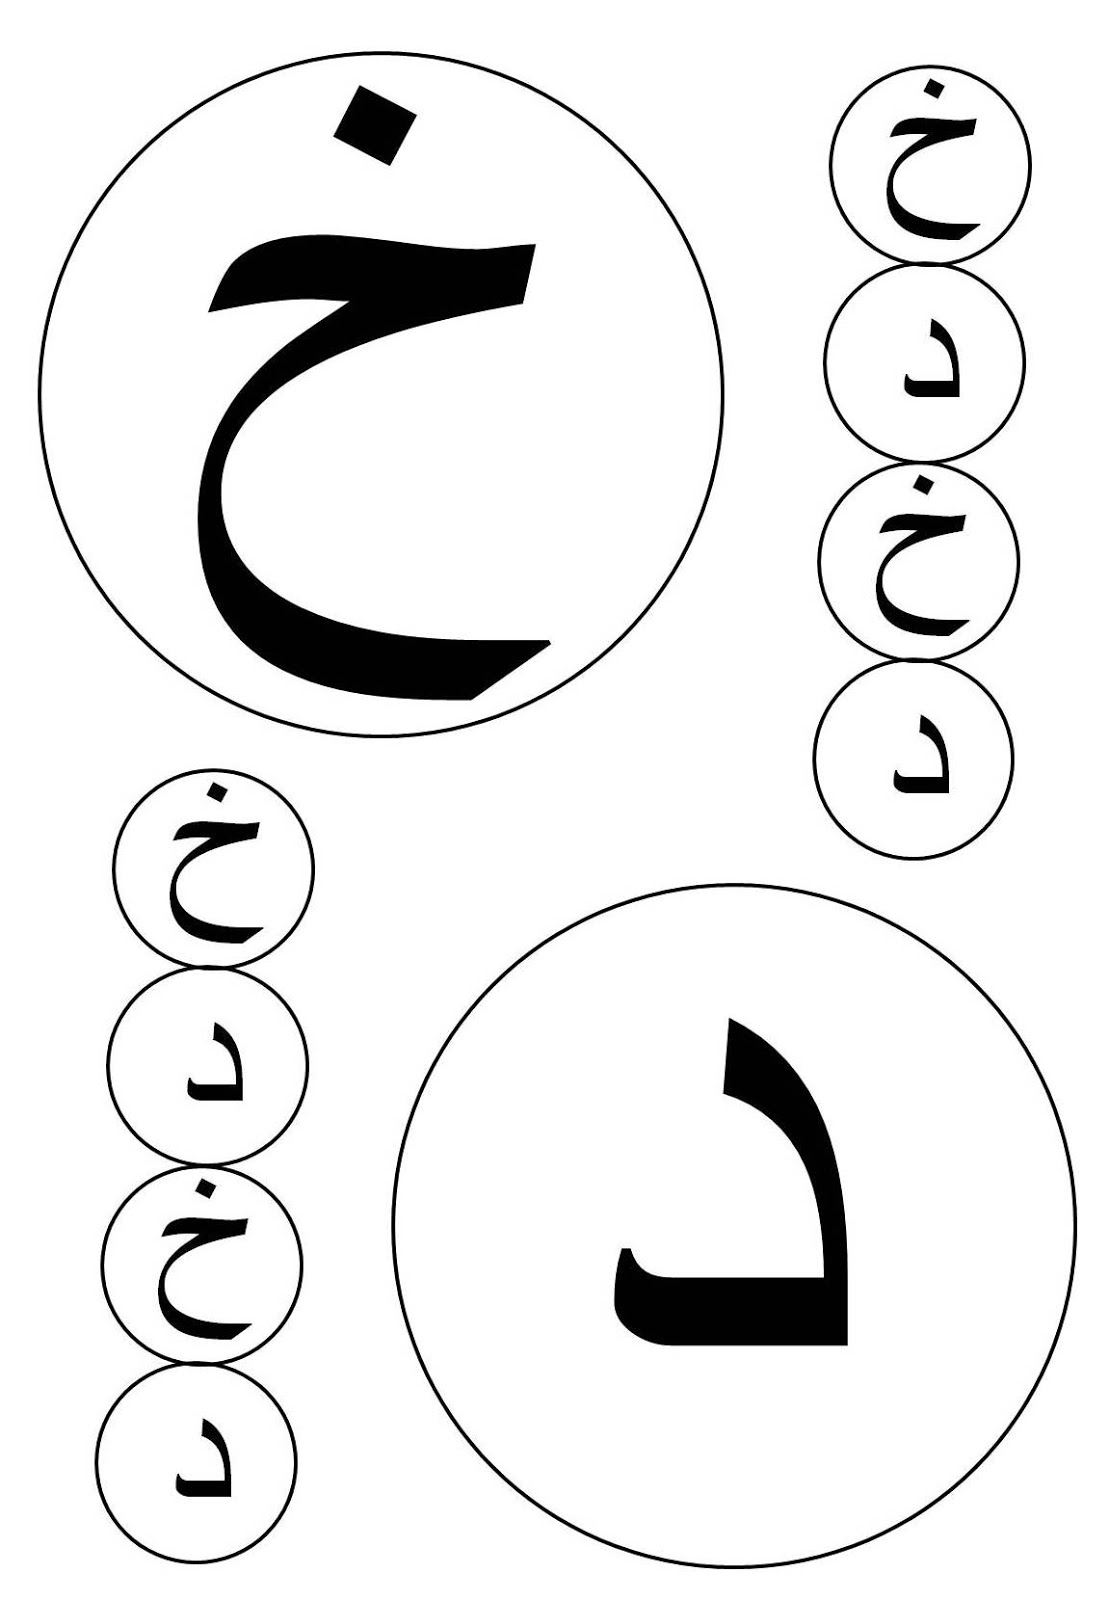 FREE Template for Arabic Letters in Circles ~ Islamic Homeschooling ...